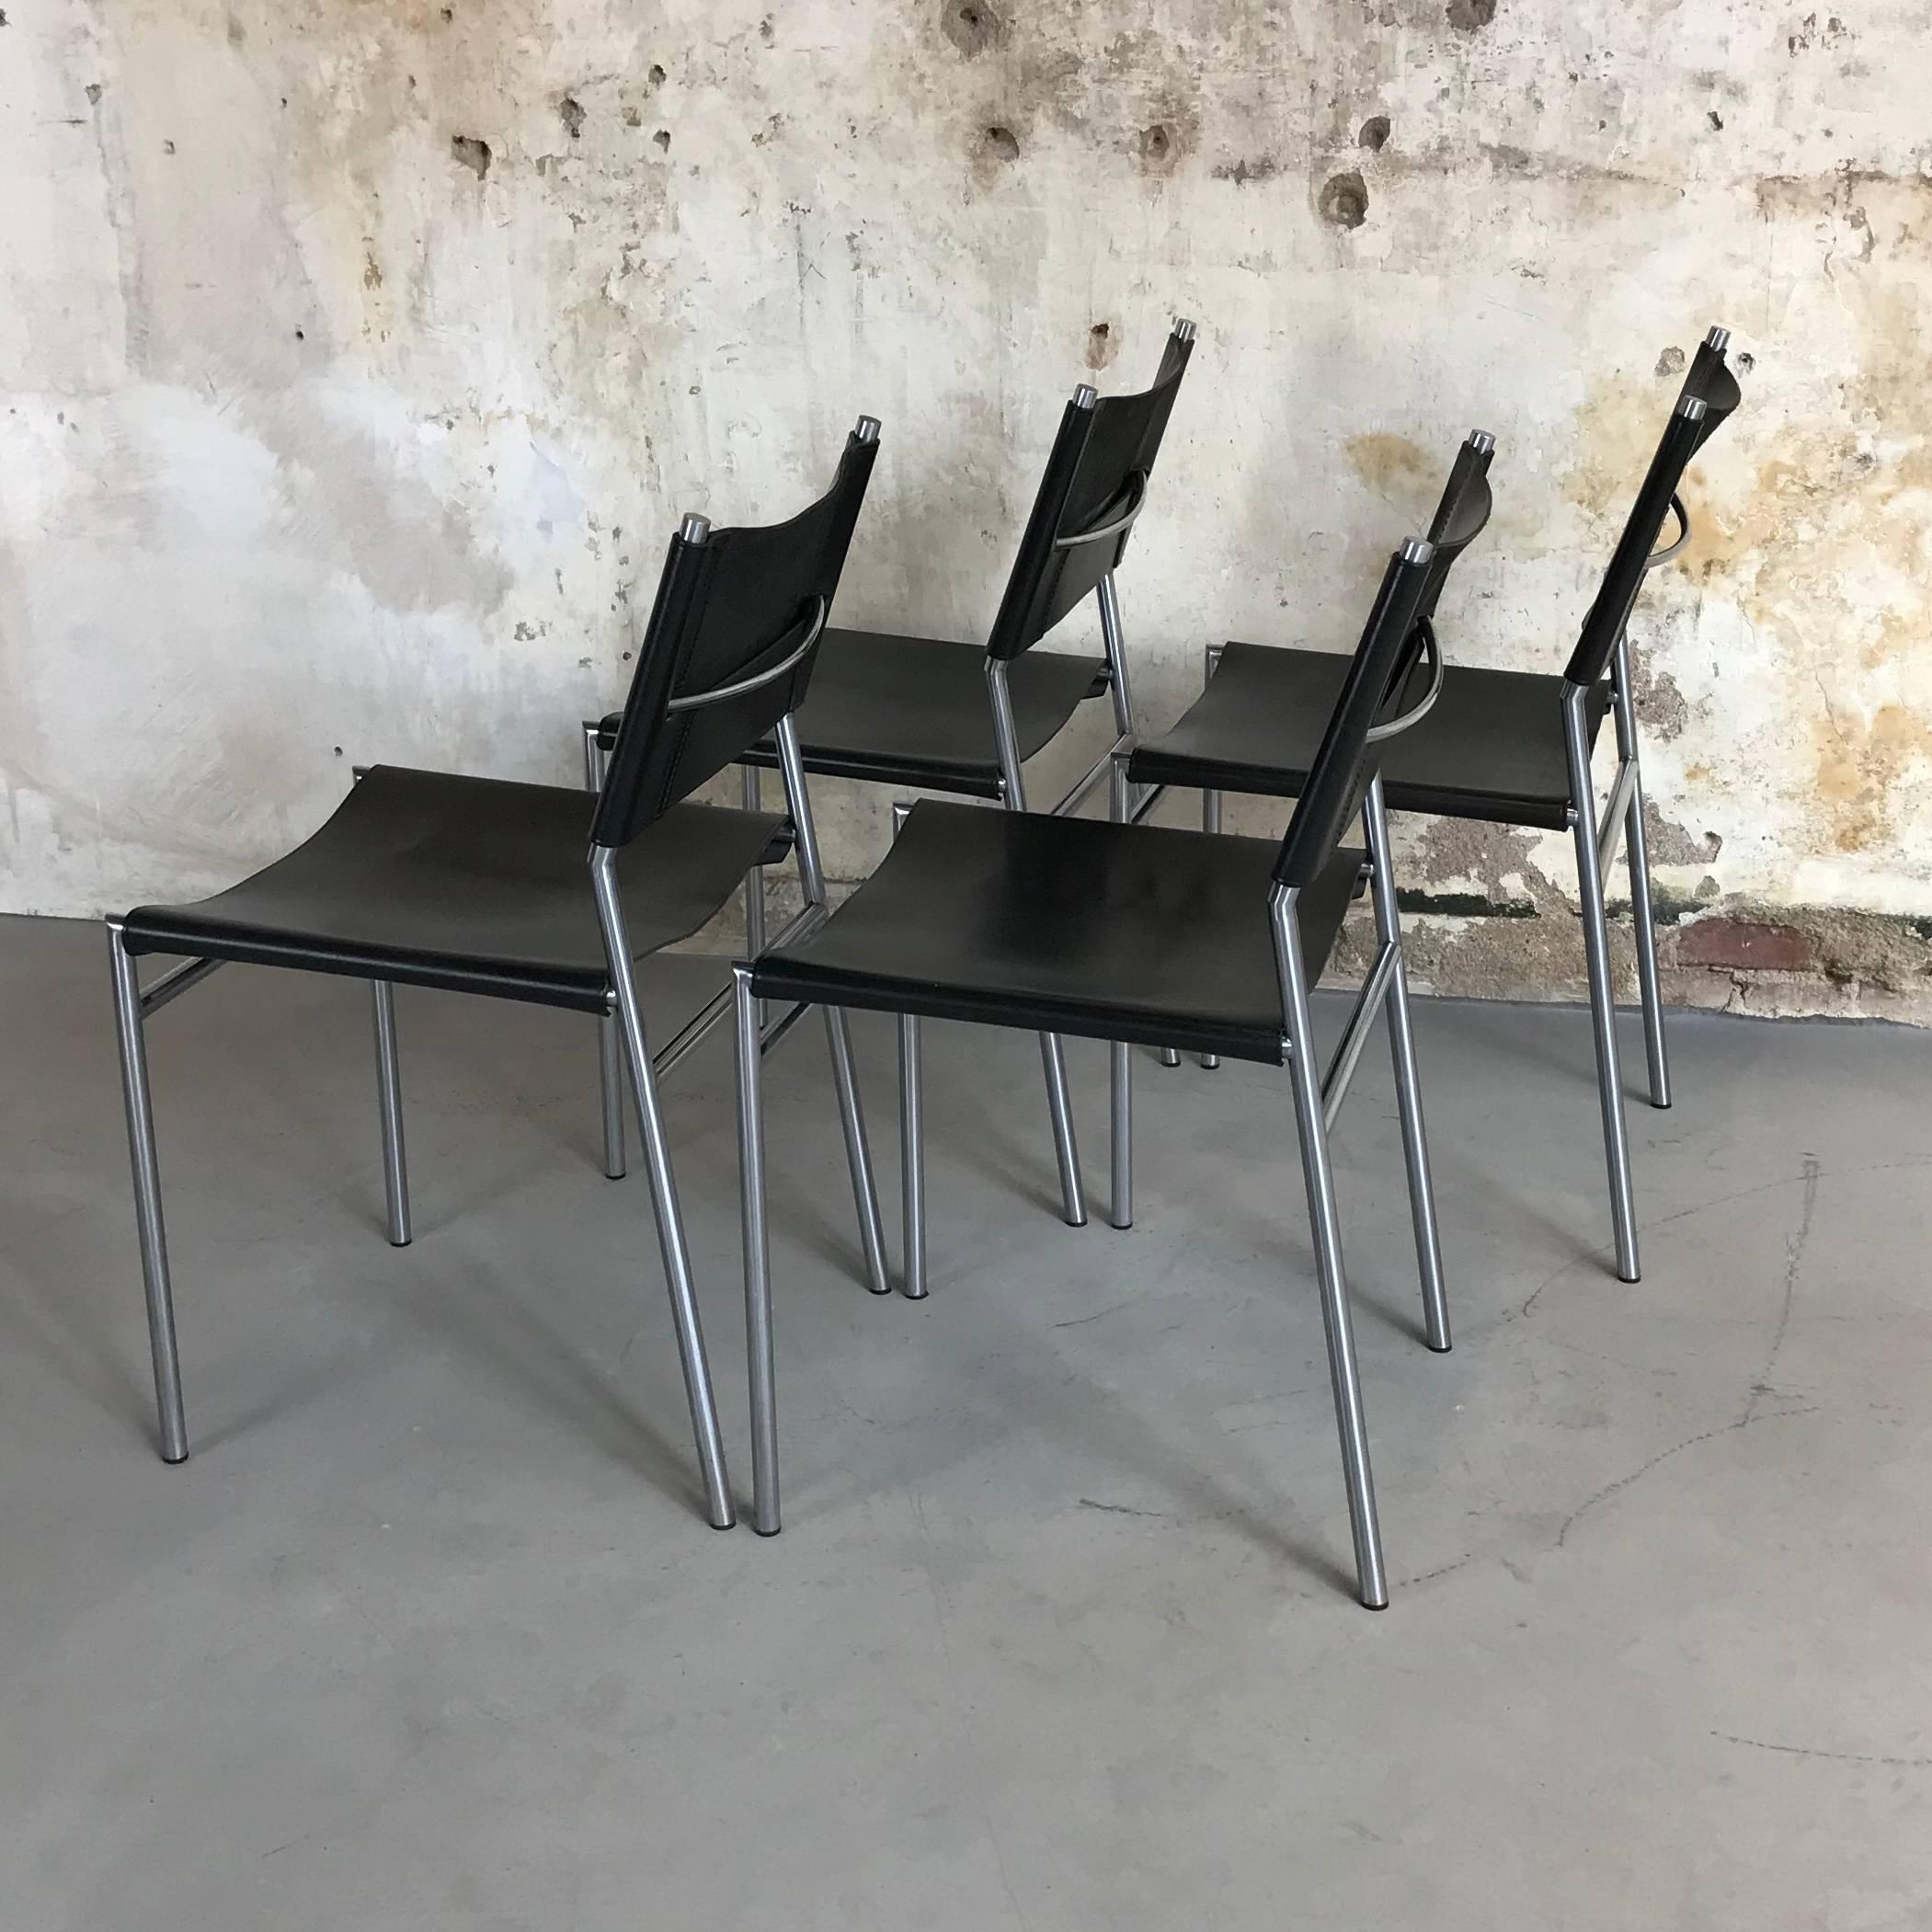 Mid-Century Modern Set of Four Patinated Saddle Leather Chairs, SE06, Martin Visser for 't Spectrum